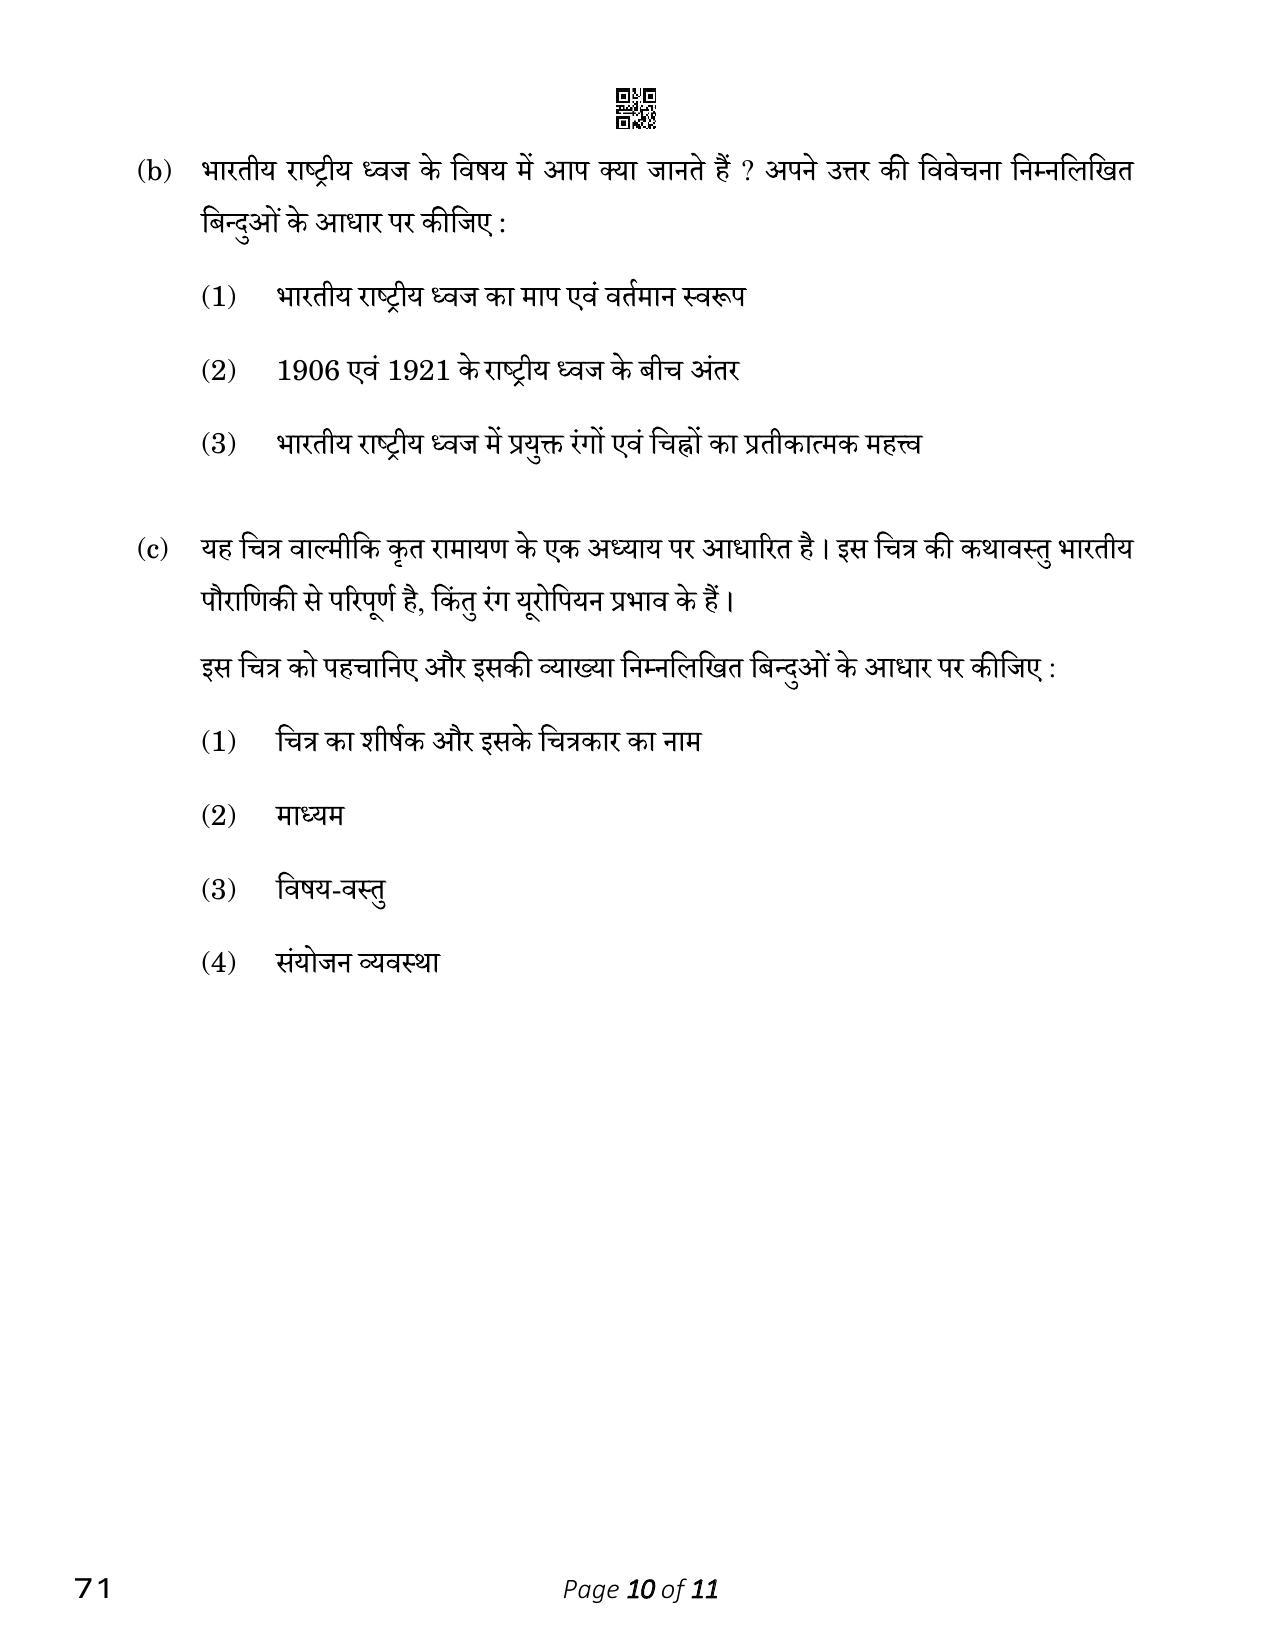 CBSE Class 12 Painting (Compartment) 2023 Question Paper - Page 10